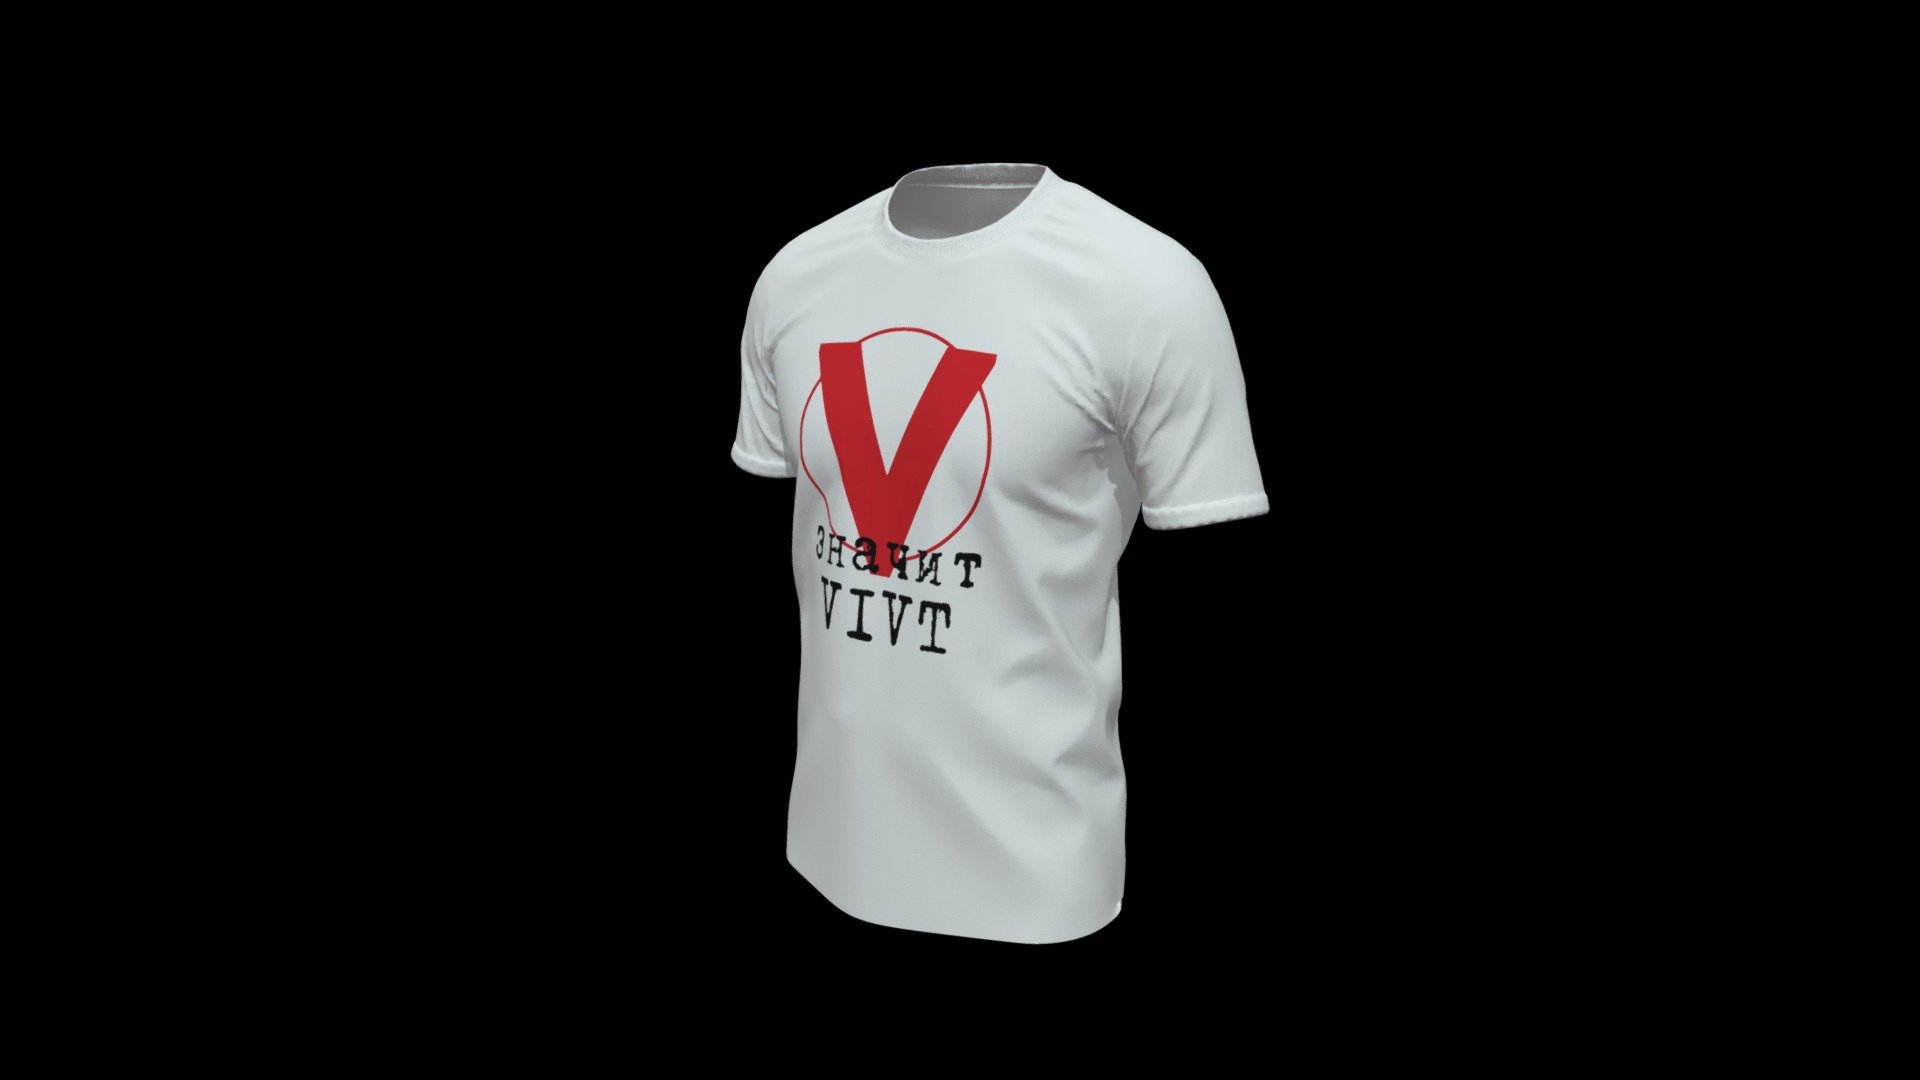 You can buy this t-shirt on https://shop.vivt.ru/ - White t-shirt with print - Download Free 3D model by hasar 3d model